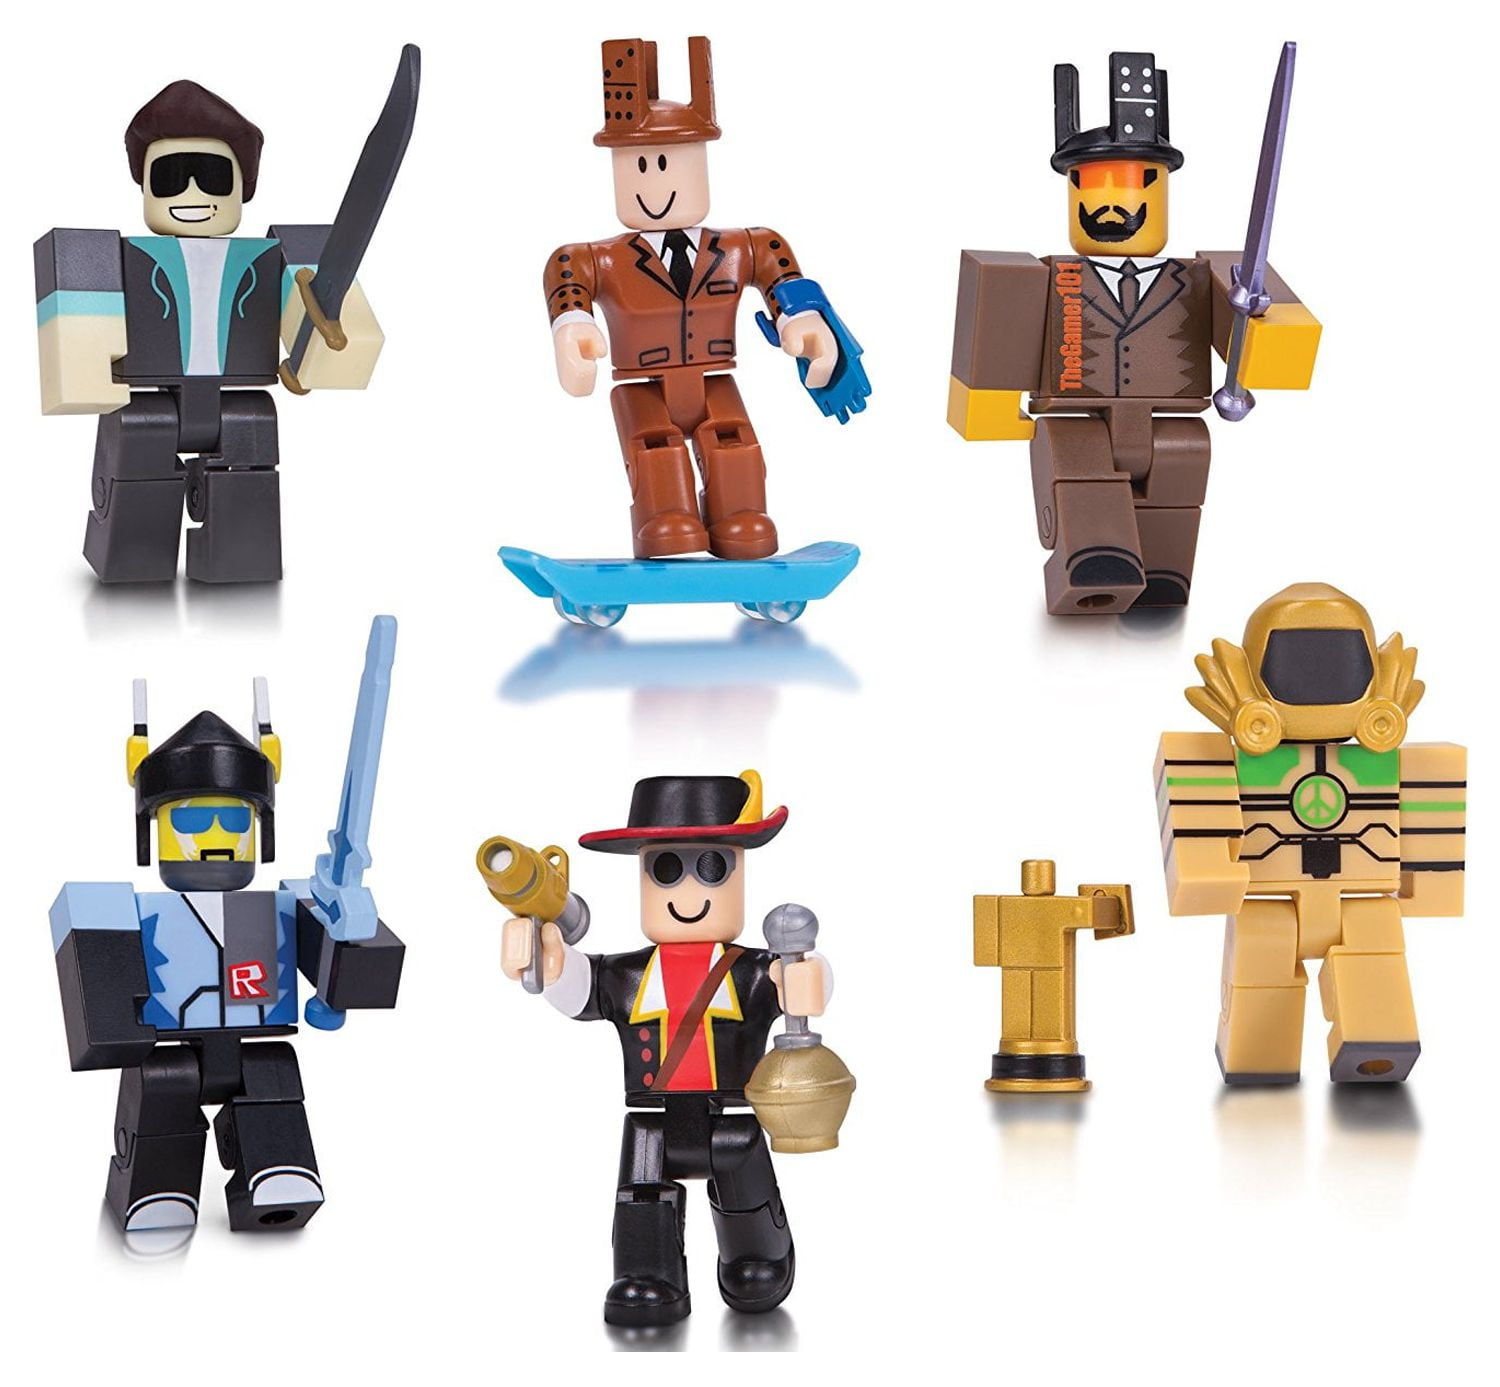 Roblox Action Collection - 15th Anniversary Roblox Icons Gold Collector's  Set [Includes Exclusive Virtual Item]